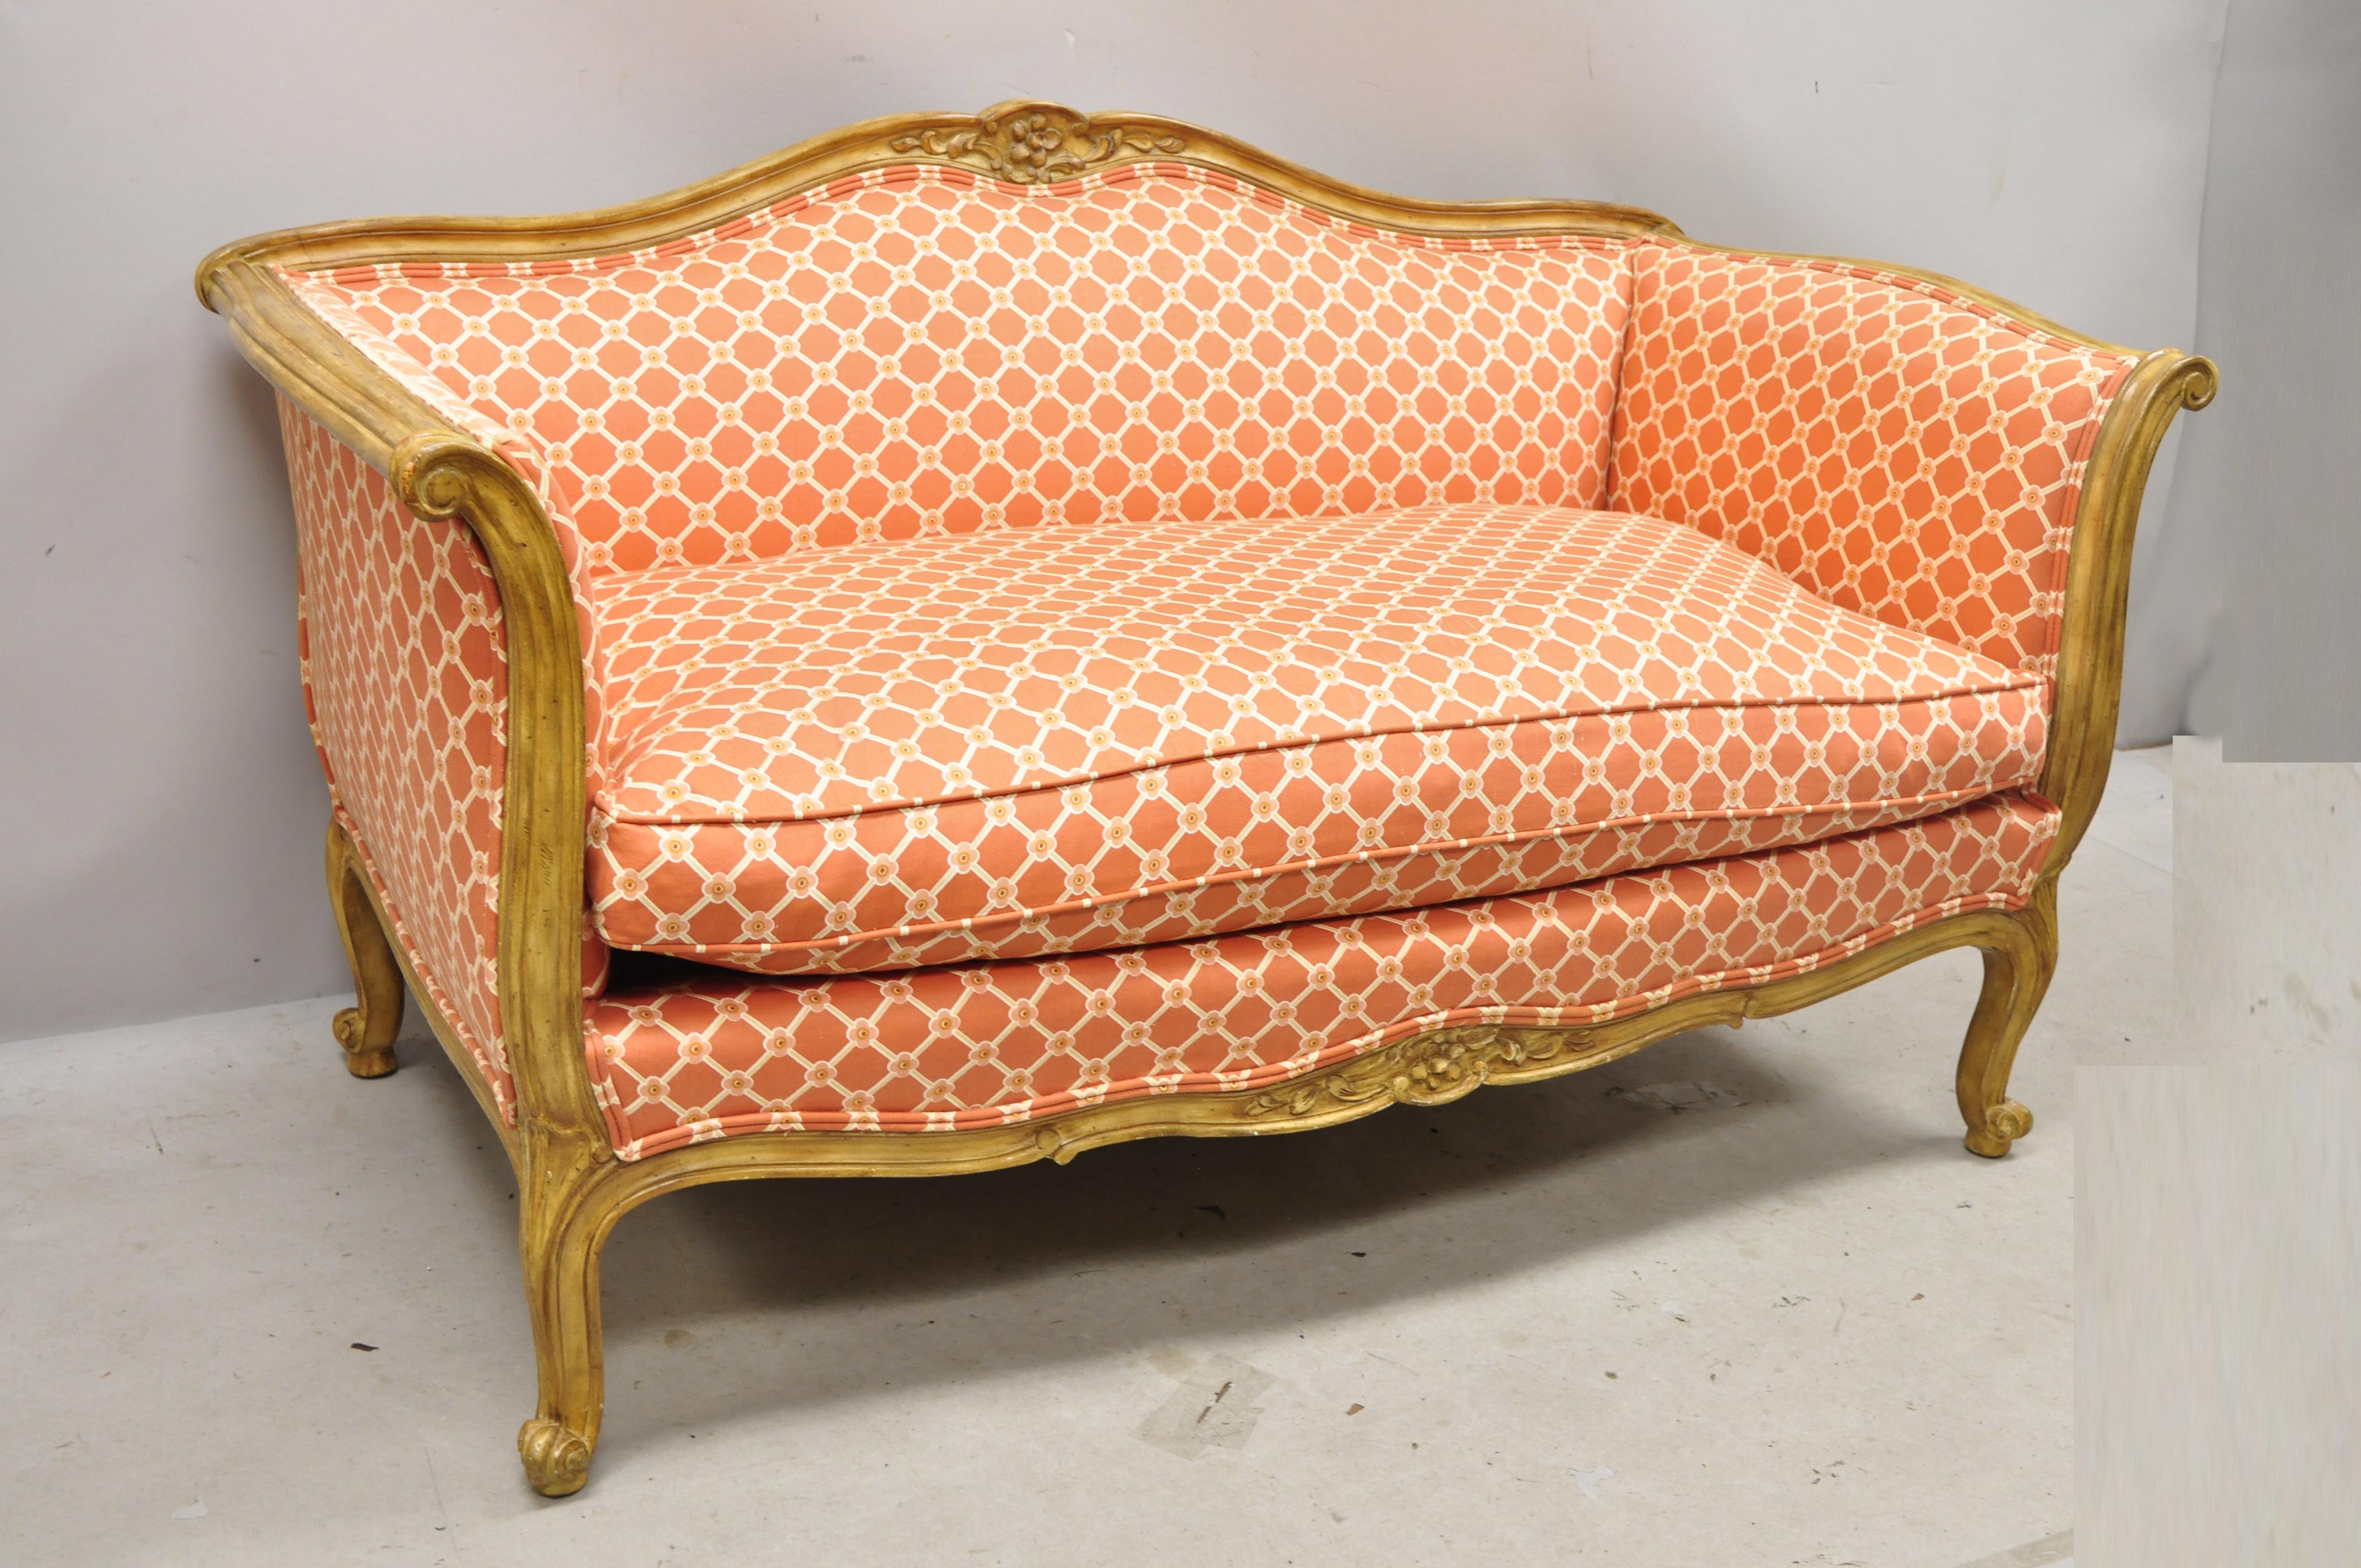 Vintage French Provincial country style Louis XV Bloomingdales Trianon loveseat settee sofa. Item features solid wood frame, distressed finish, nicely carved details, original label, cabriole legs, quality Italian craftsmanship. From the